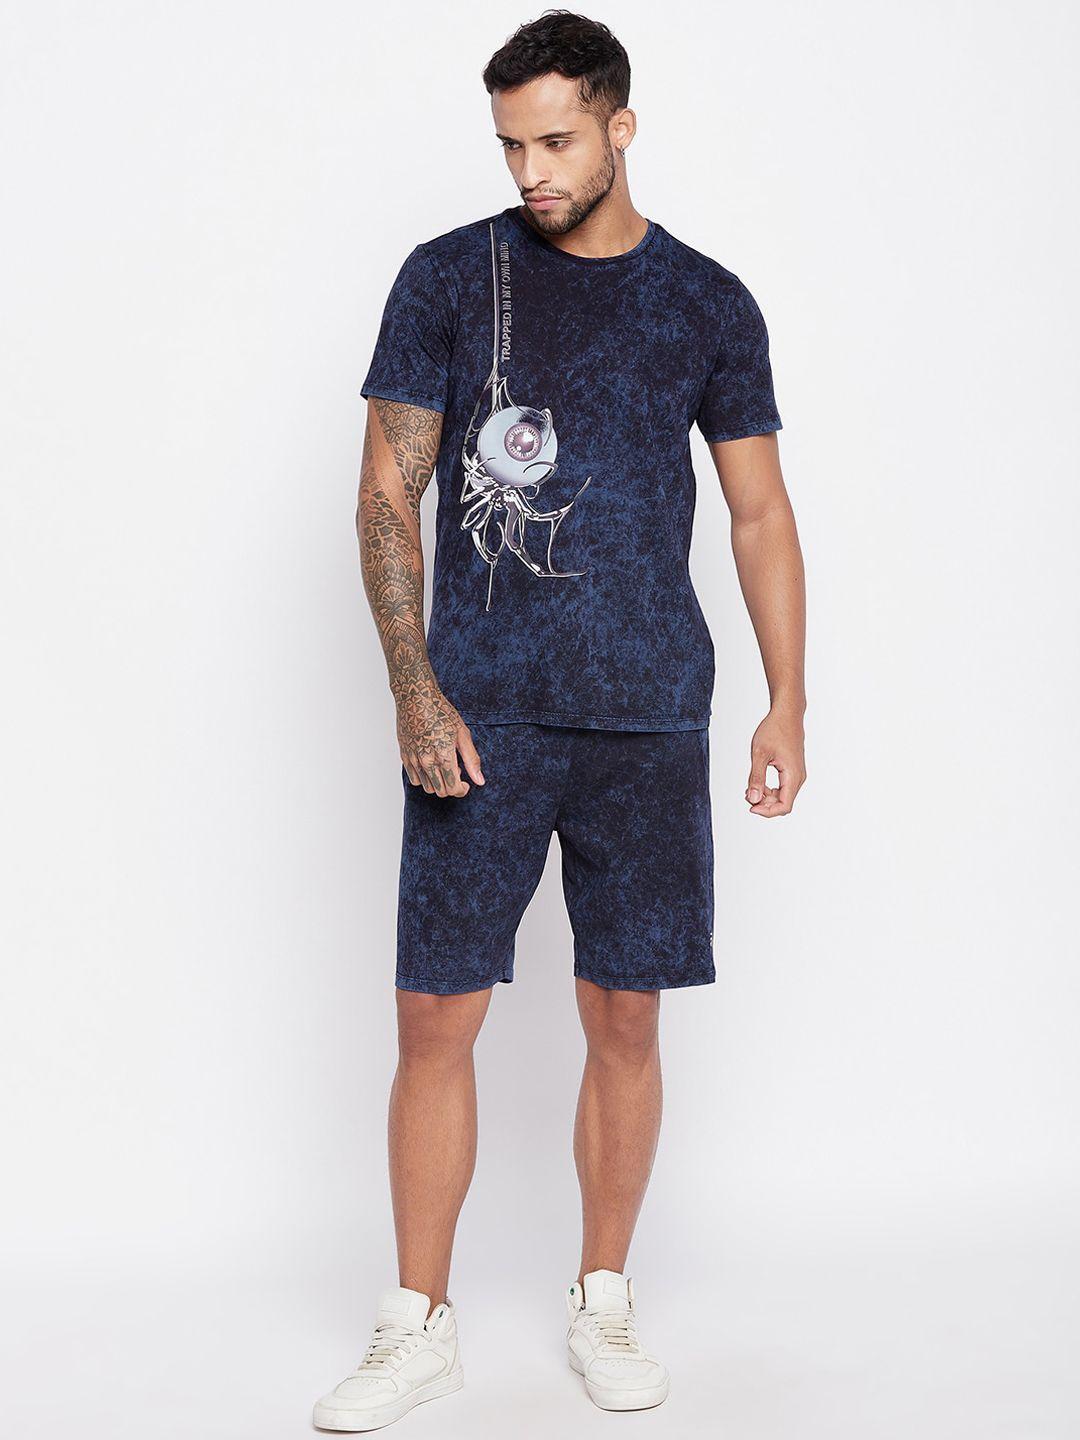 edrio printed pure cotton round neck short sleeves t-shirt with shorts co-ords